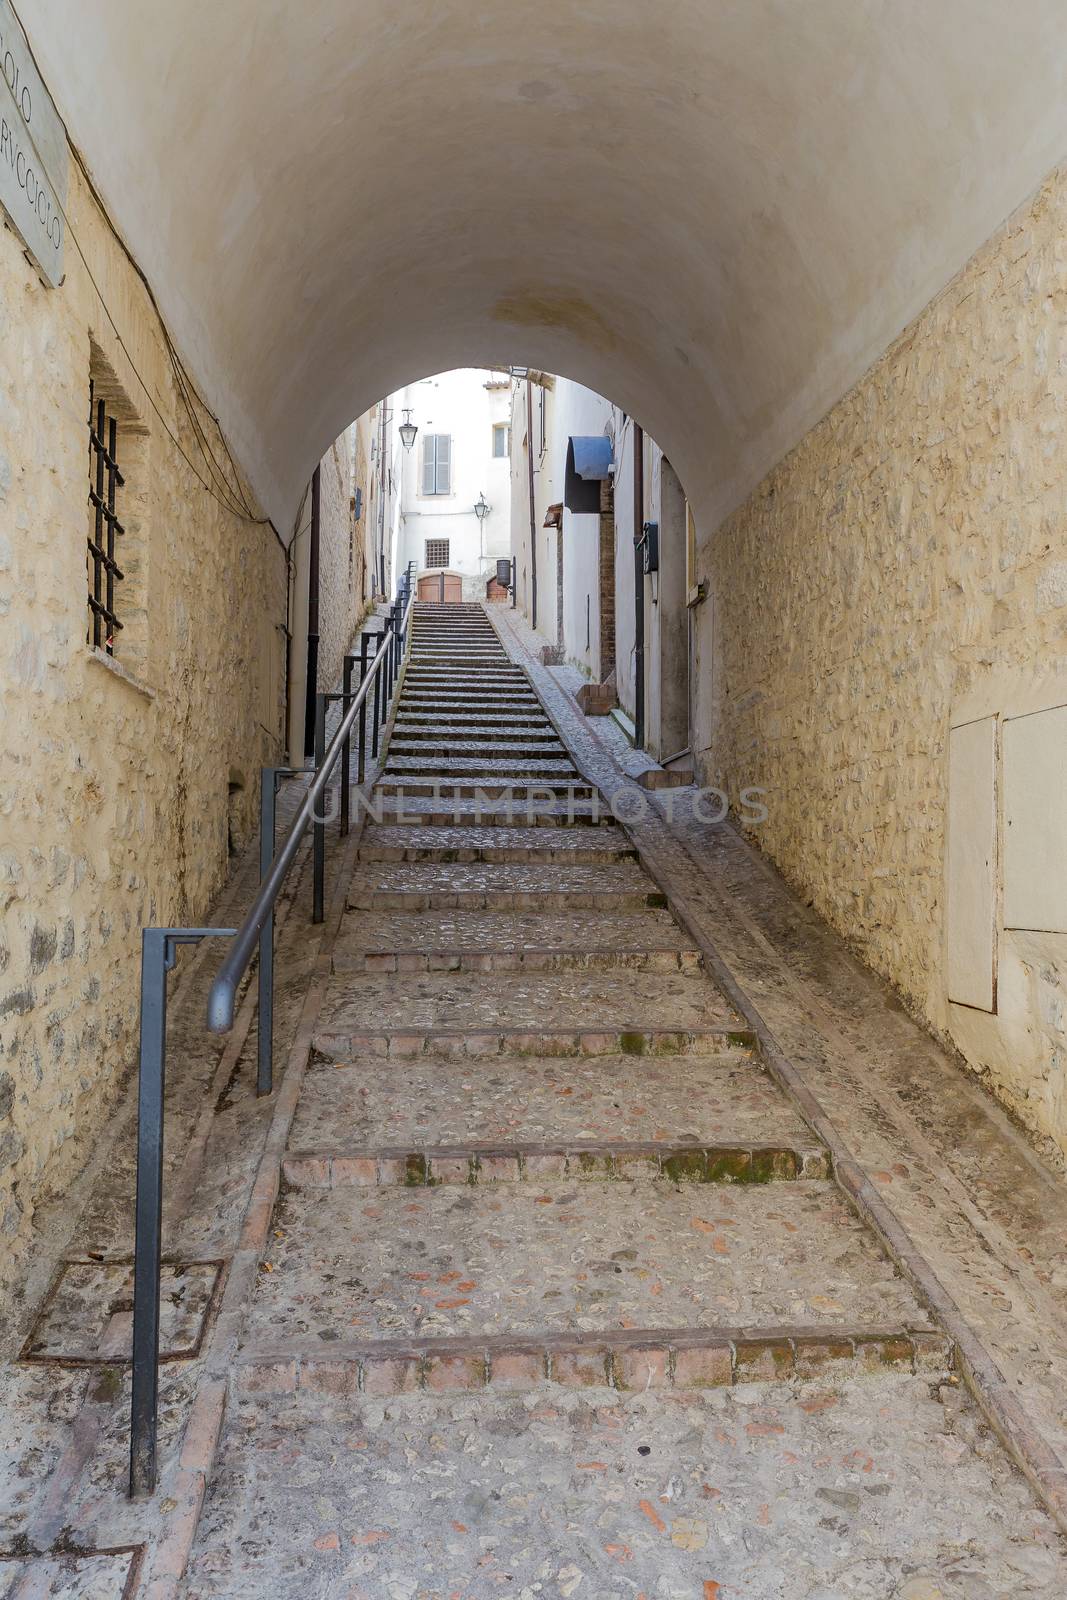 Streets and alleys in the wonderful town of Spoleto (Italy)